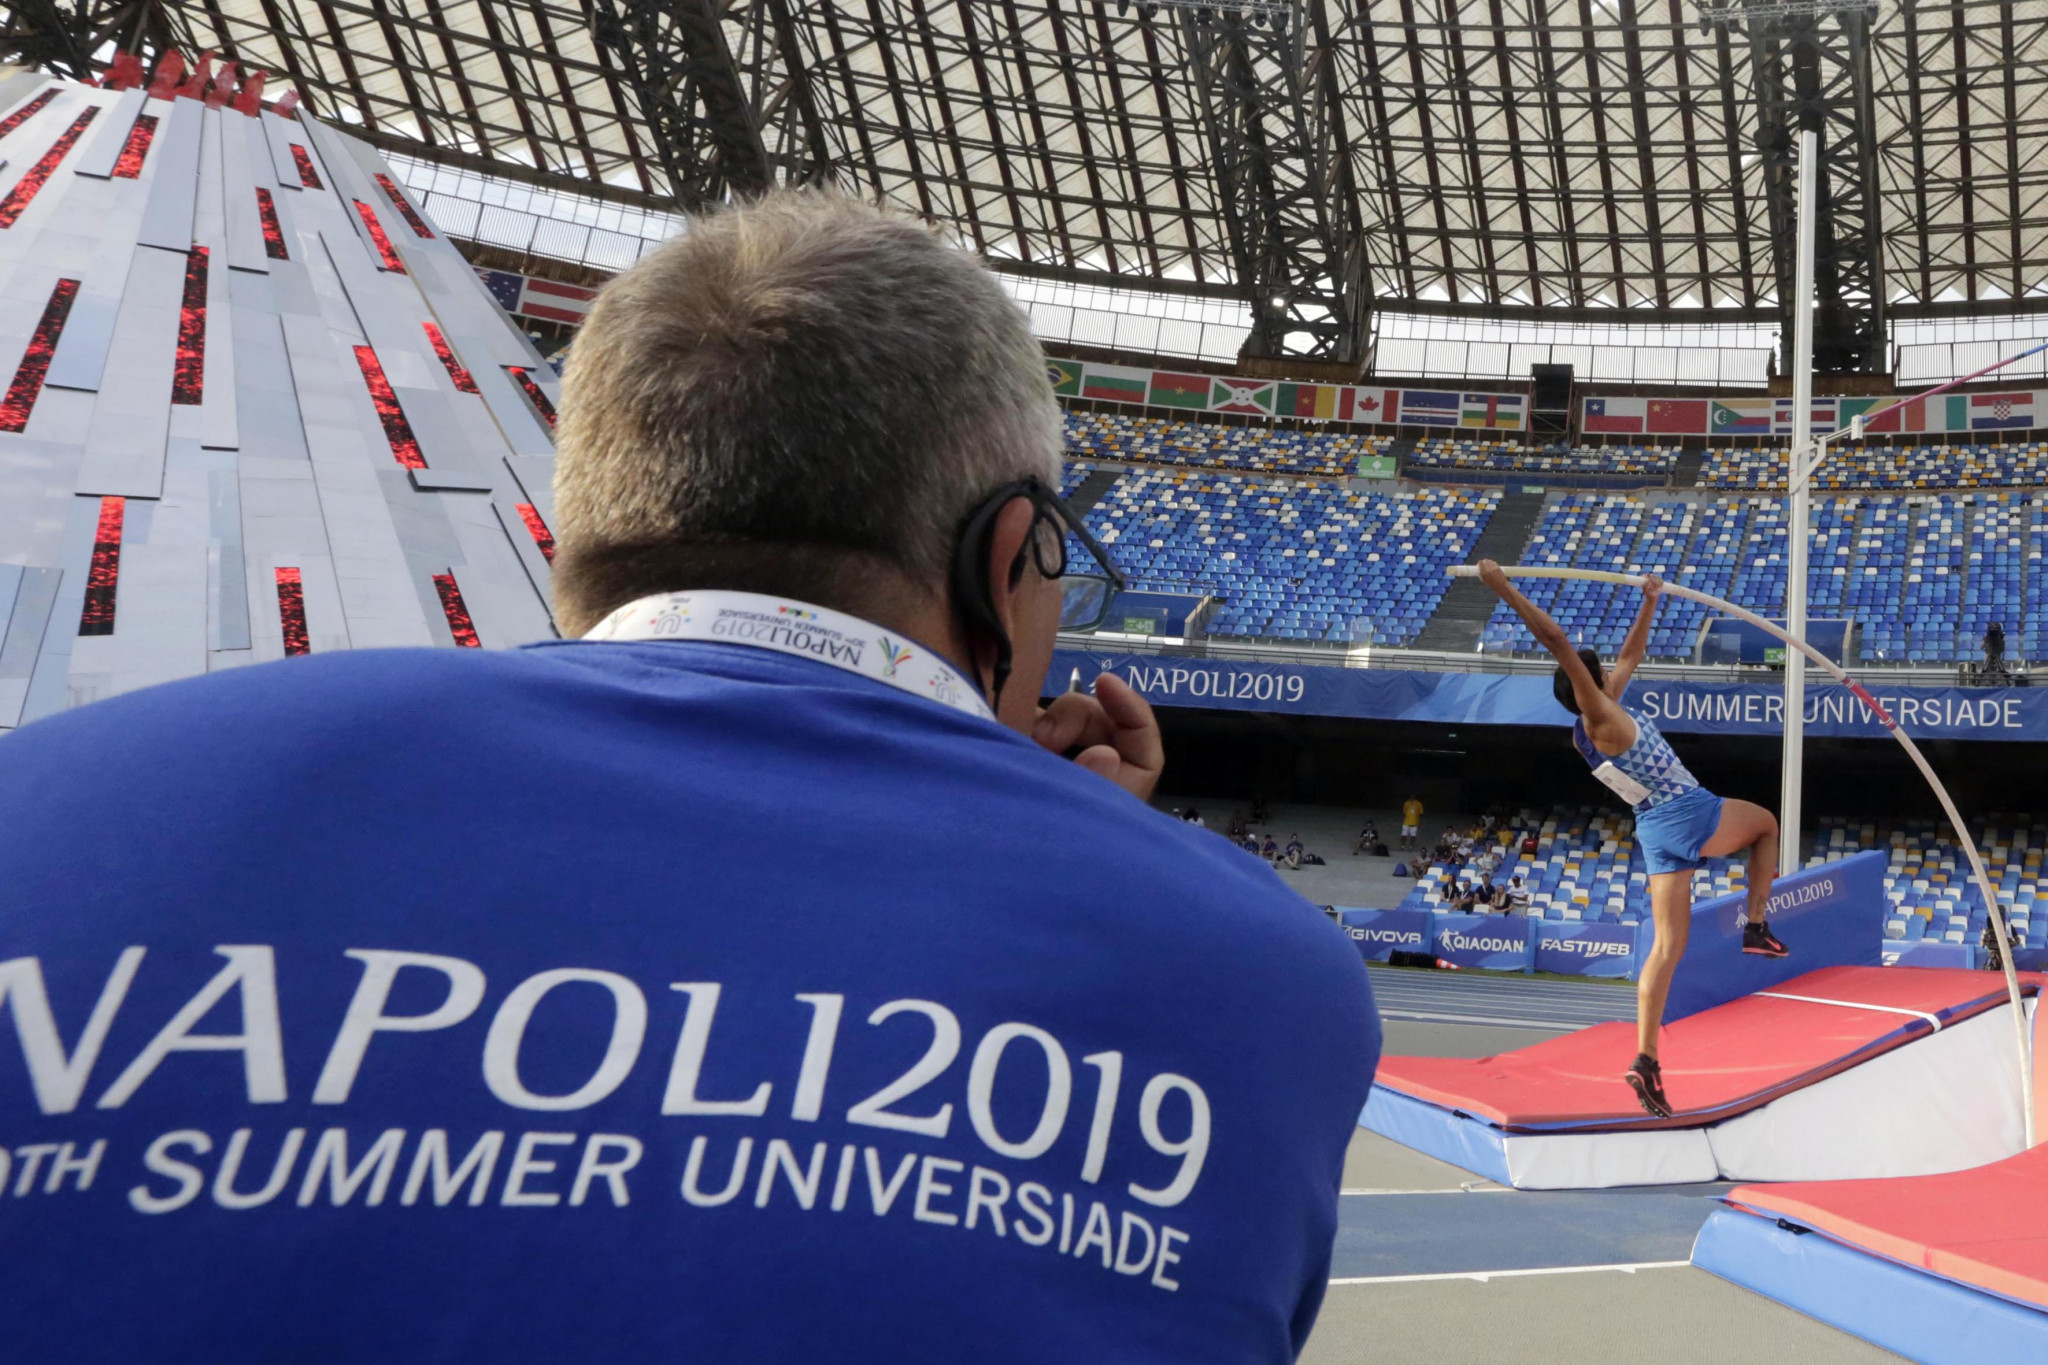 Athletics continued at San Paolo Stadium, with the hosts winning gold through Roberta Bruni in the women's pole vault ©Naples 2019